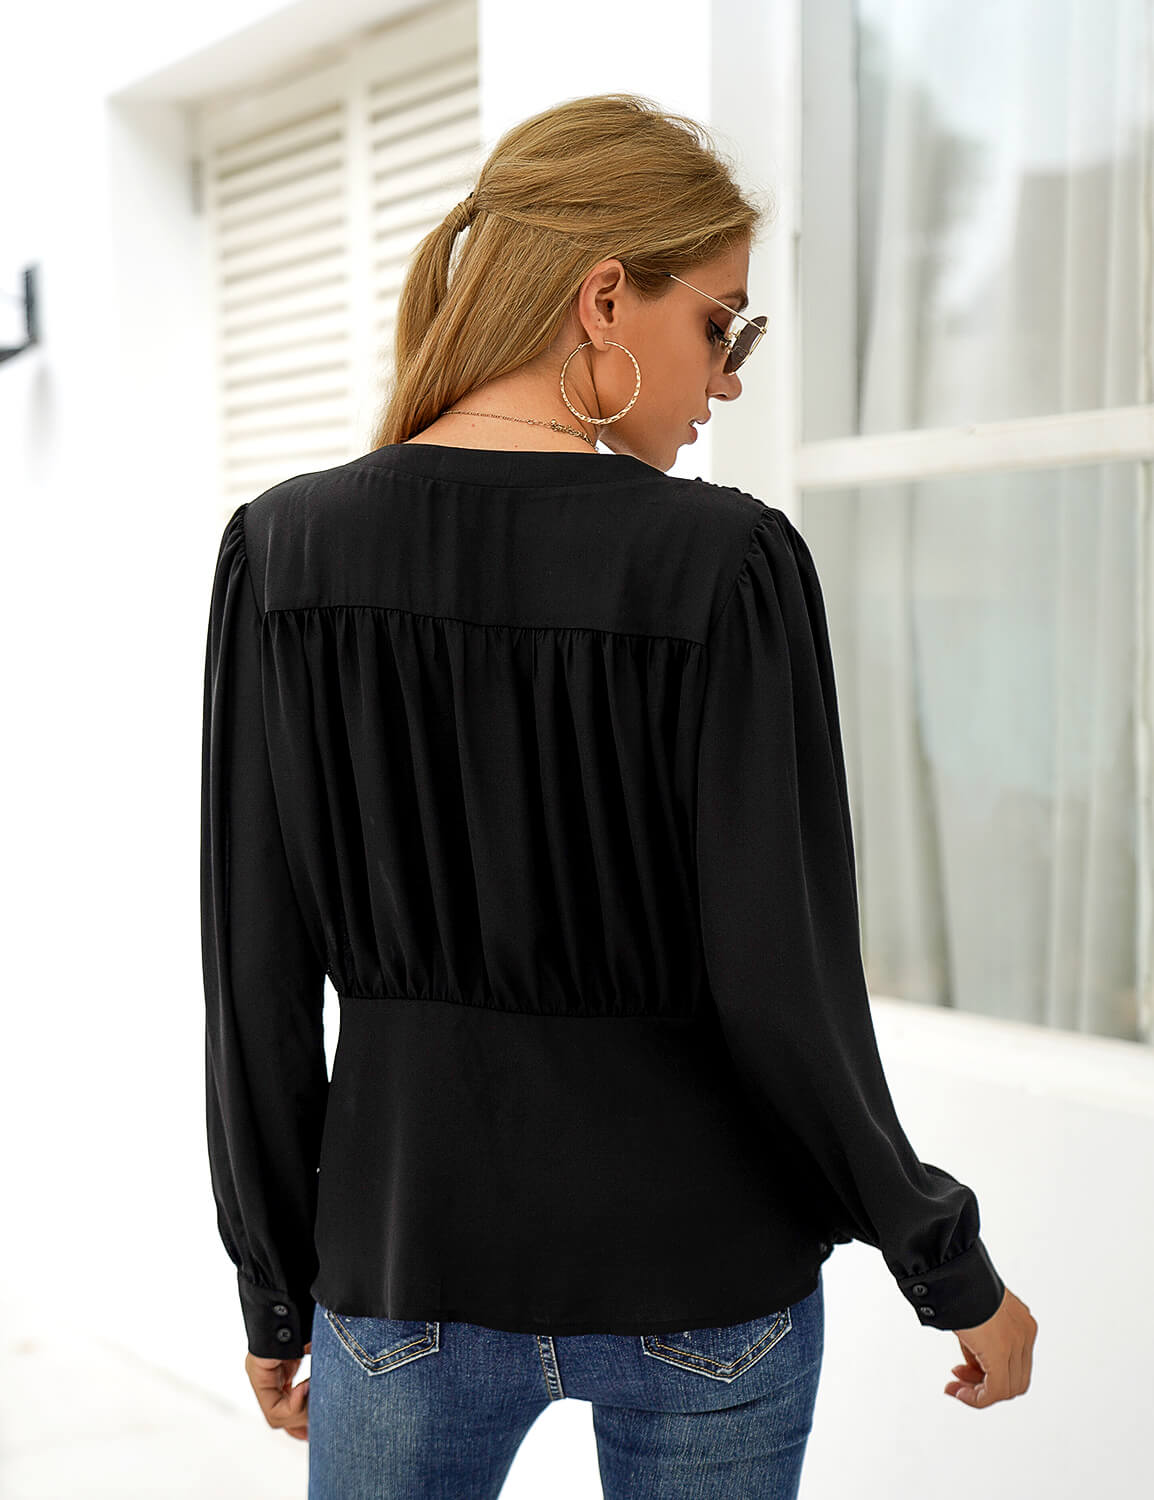 Blooming Jelly_Loose V Neck Chiffon Blouse_Black_154196_02_Street Style Women Fashion Outfits_Tops_Blouse